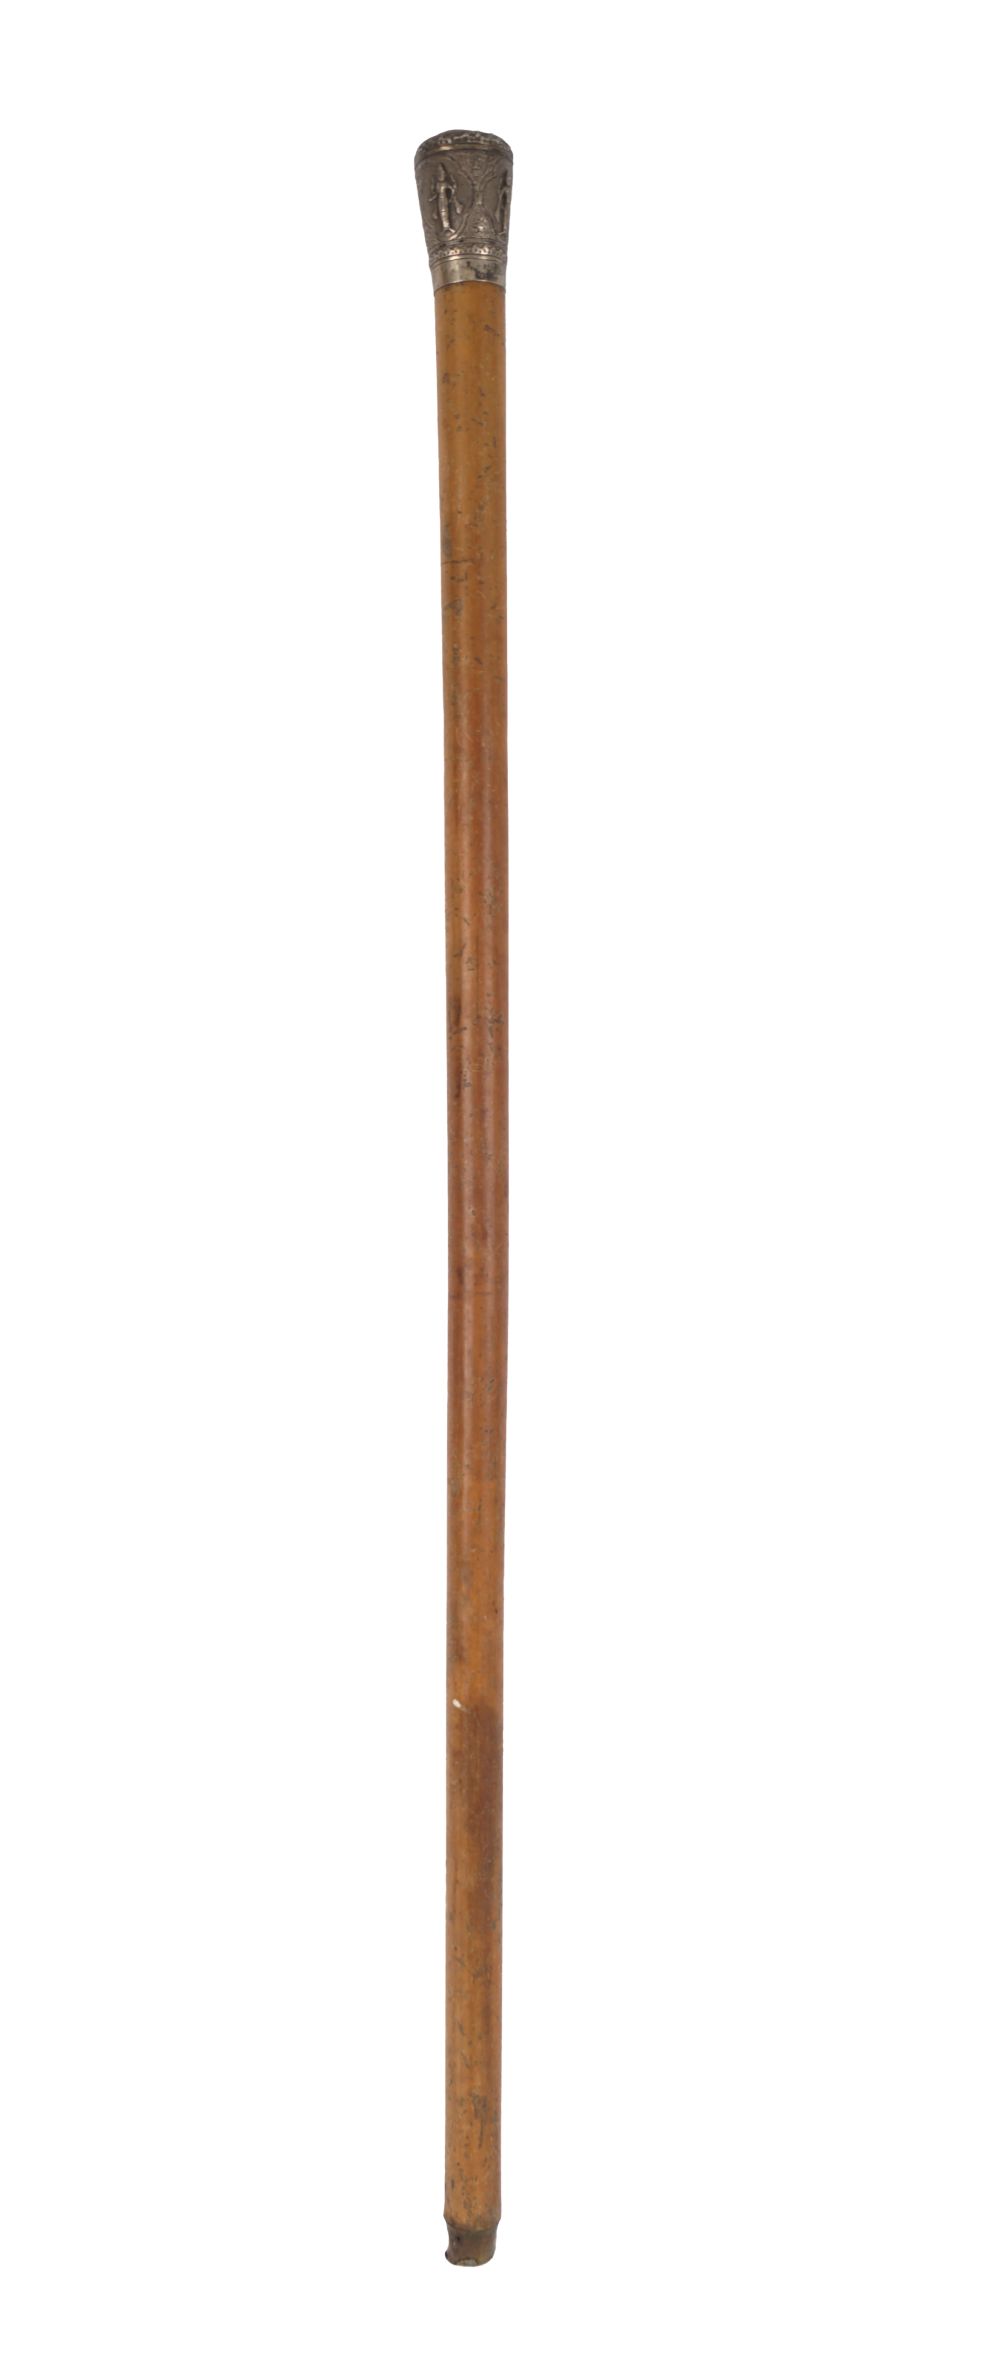 EARLY 20TH-CENTURY WALKING STICK - Image 2 of 2